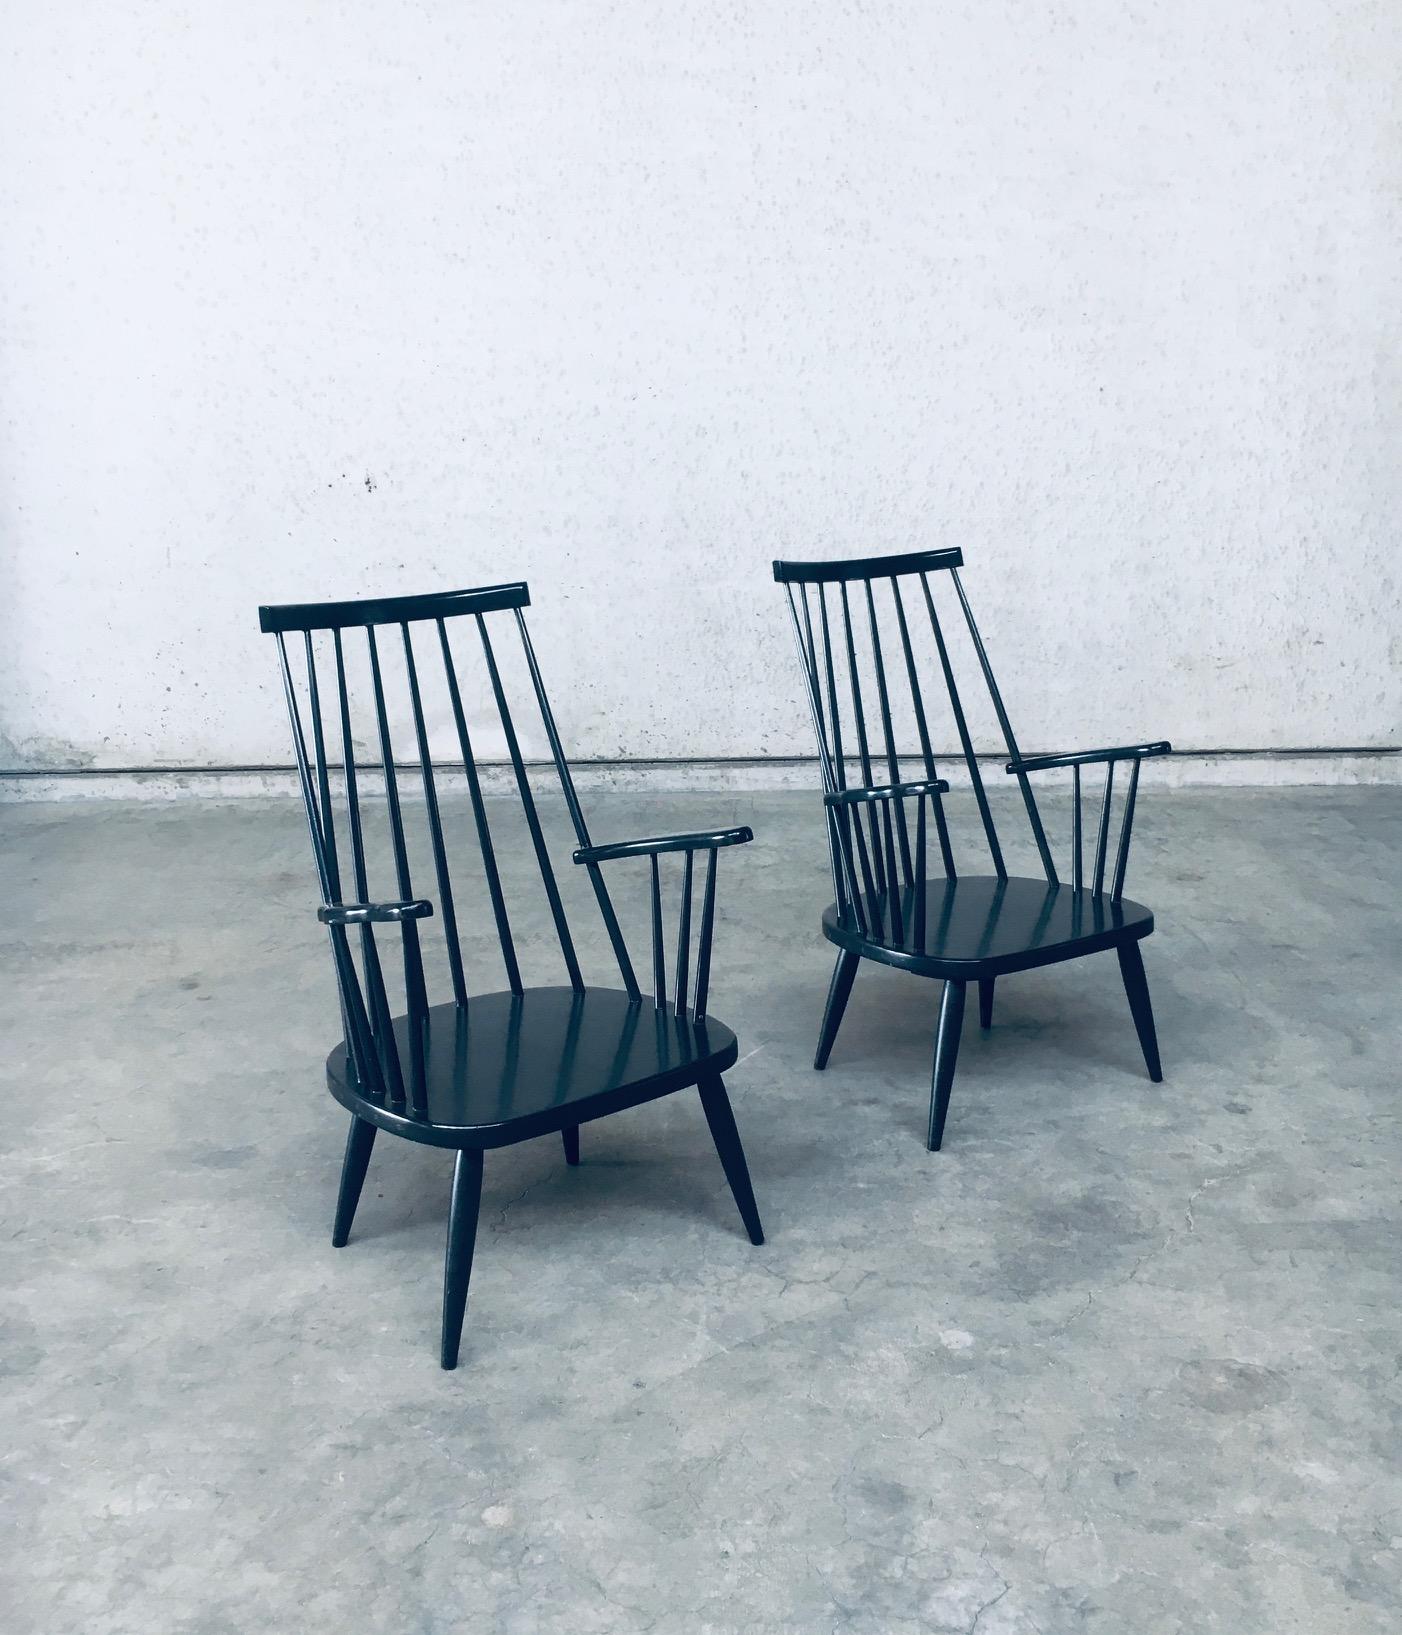 Vintage Midcentury Modern Scandinavian Design Spindle Back Lounge Chair set. Made in Denmark, 1960's period. No maker markings. Black lacquered beech wood constructed low arm chairs. These come in very good, all original condition. One has it's